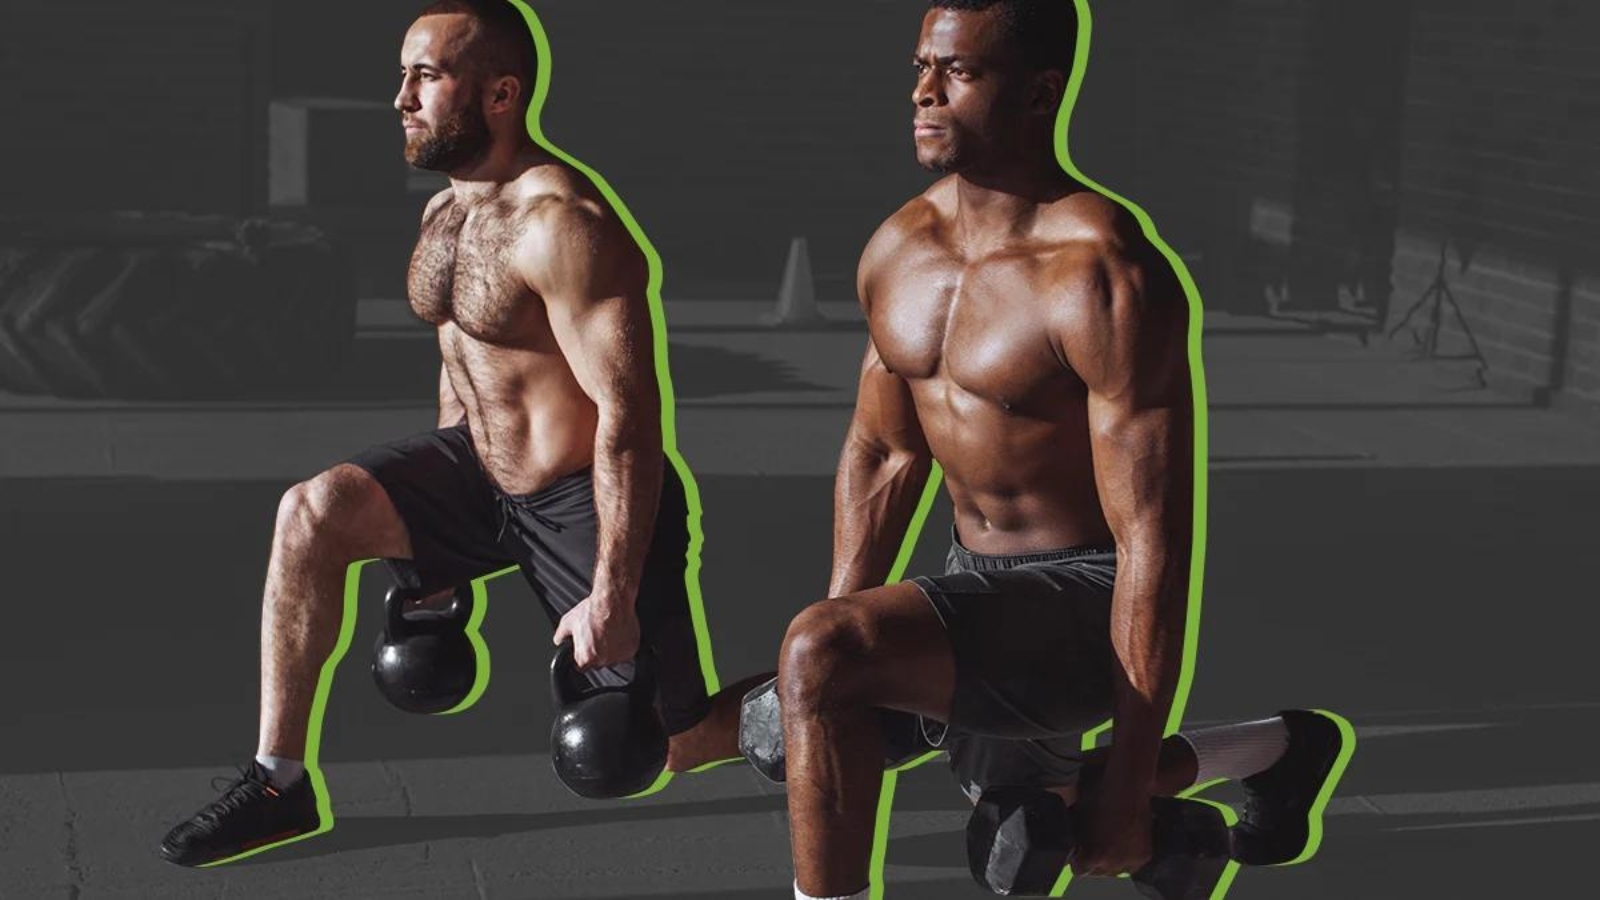 The best leg exercises according to professional athletes and trainers